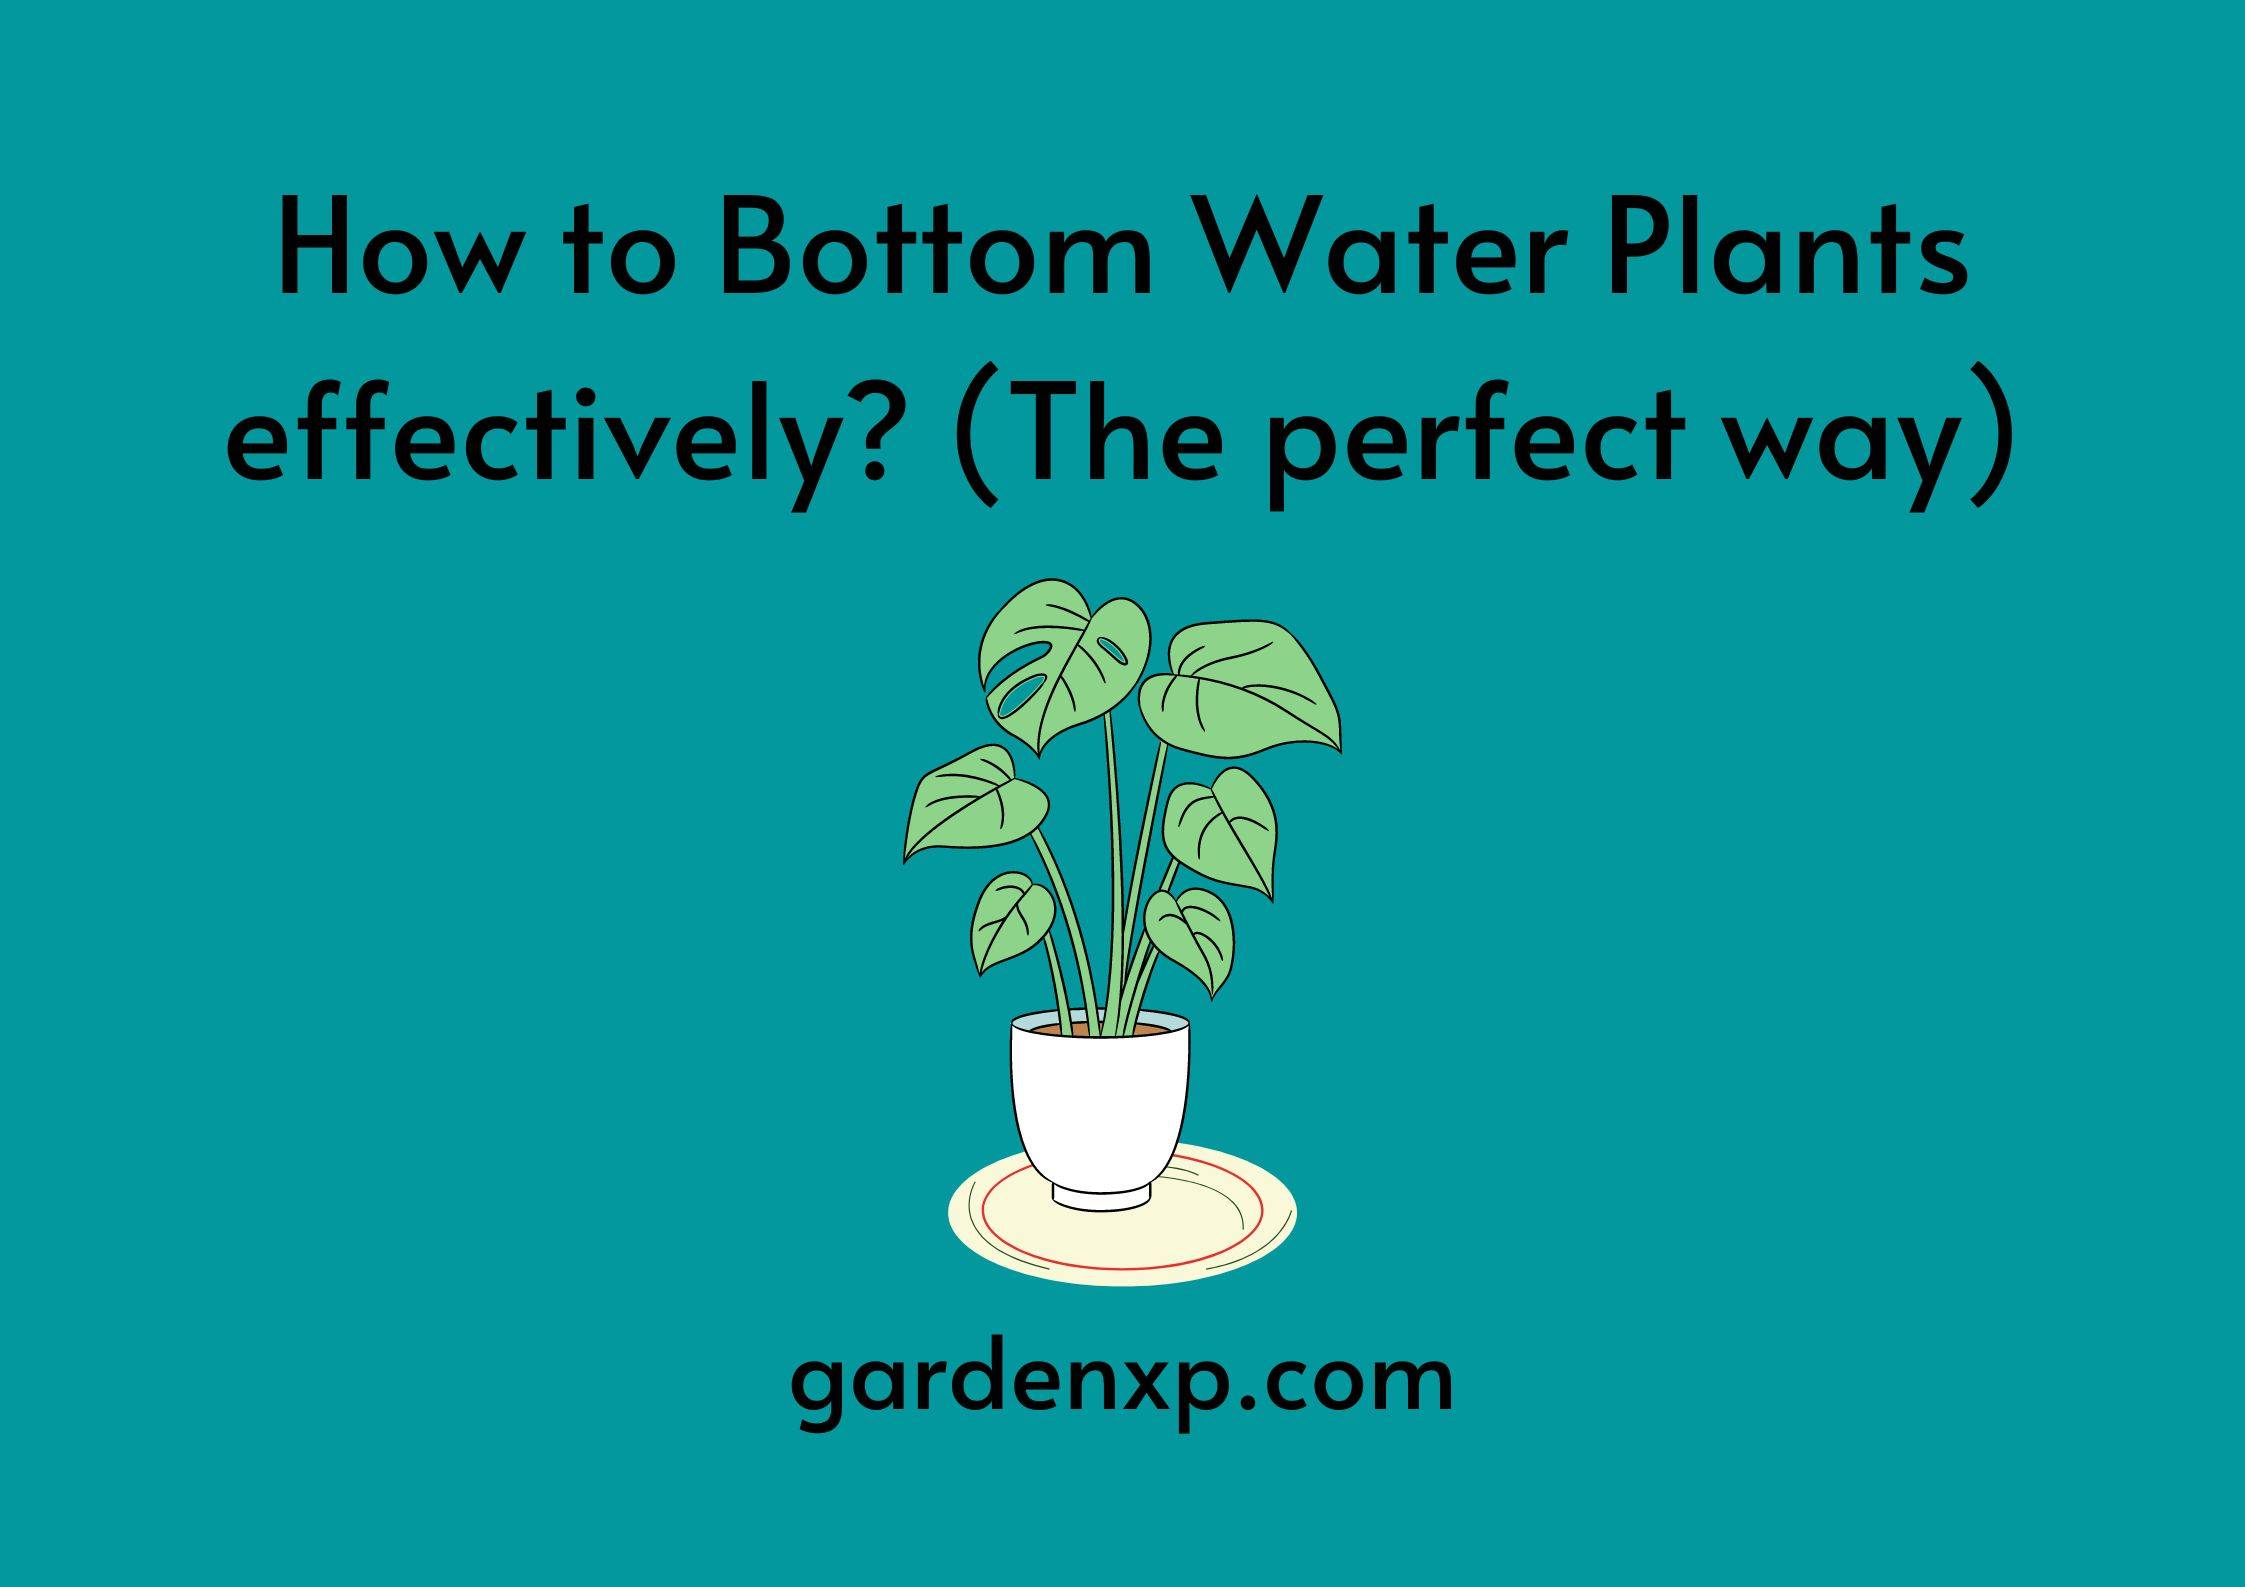 How to Bottom Water Plants effectively? (The perfect way)